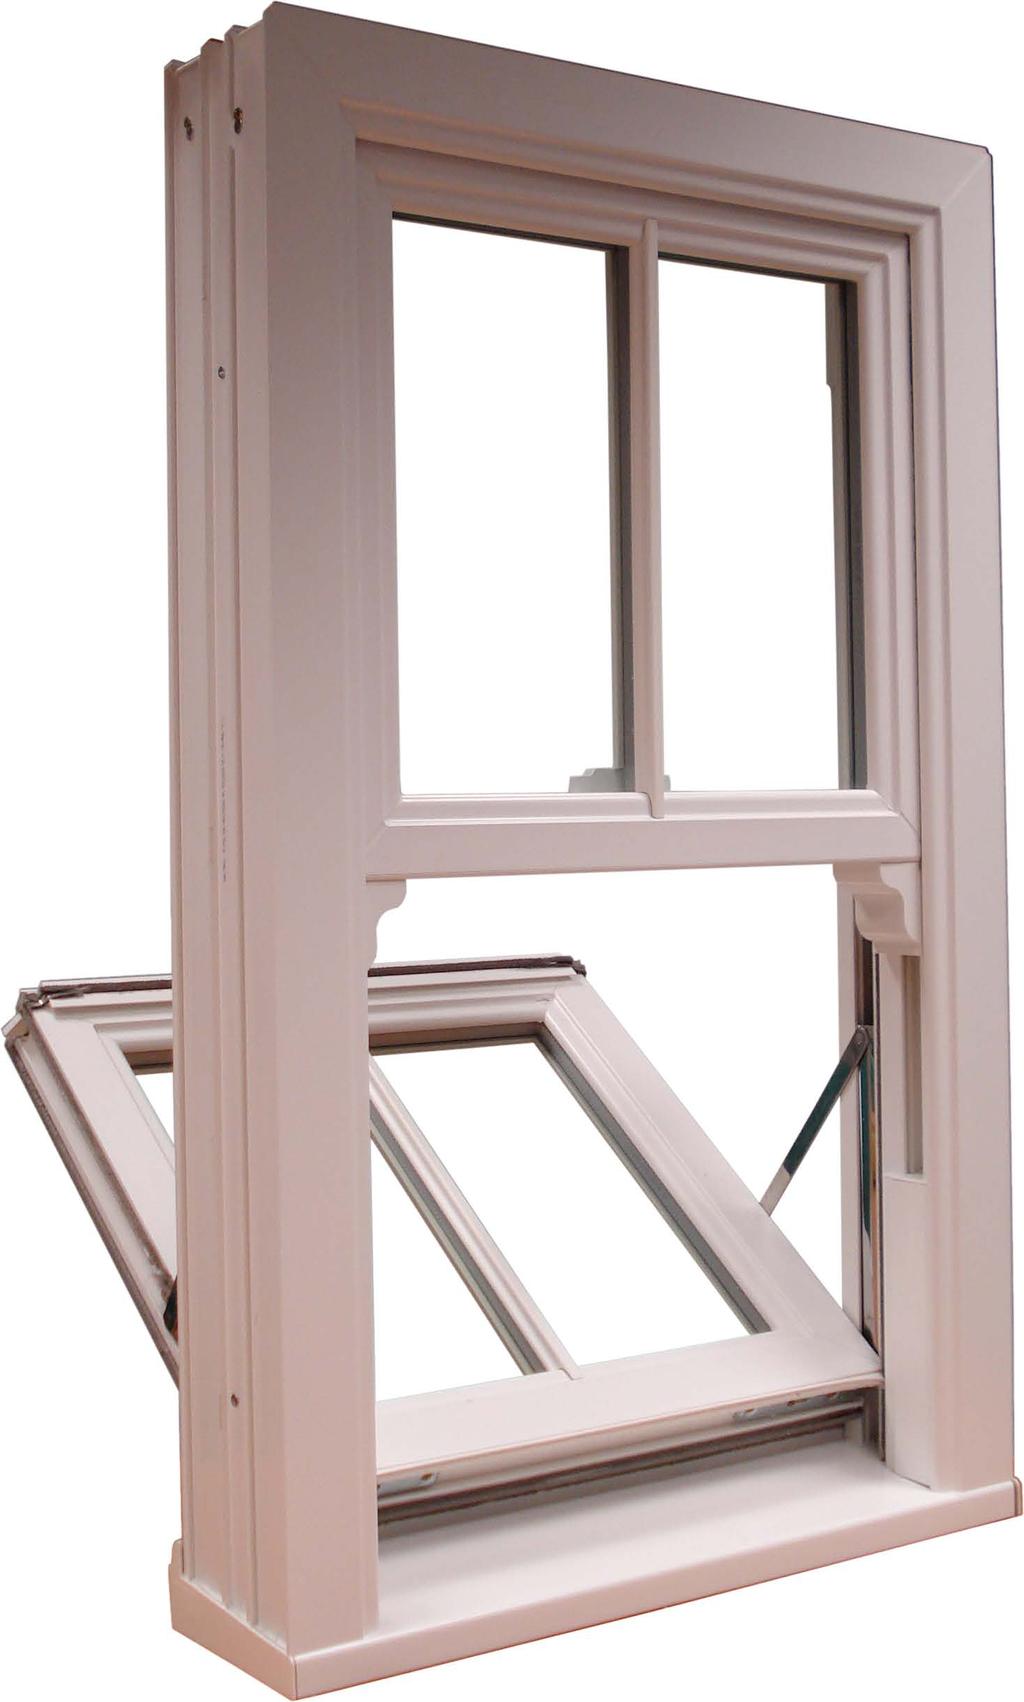 The PVC-U vertical sliding sash windows not only slide up and down like traditional